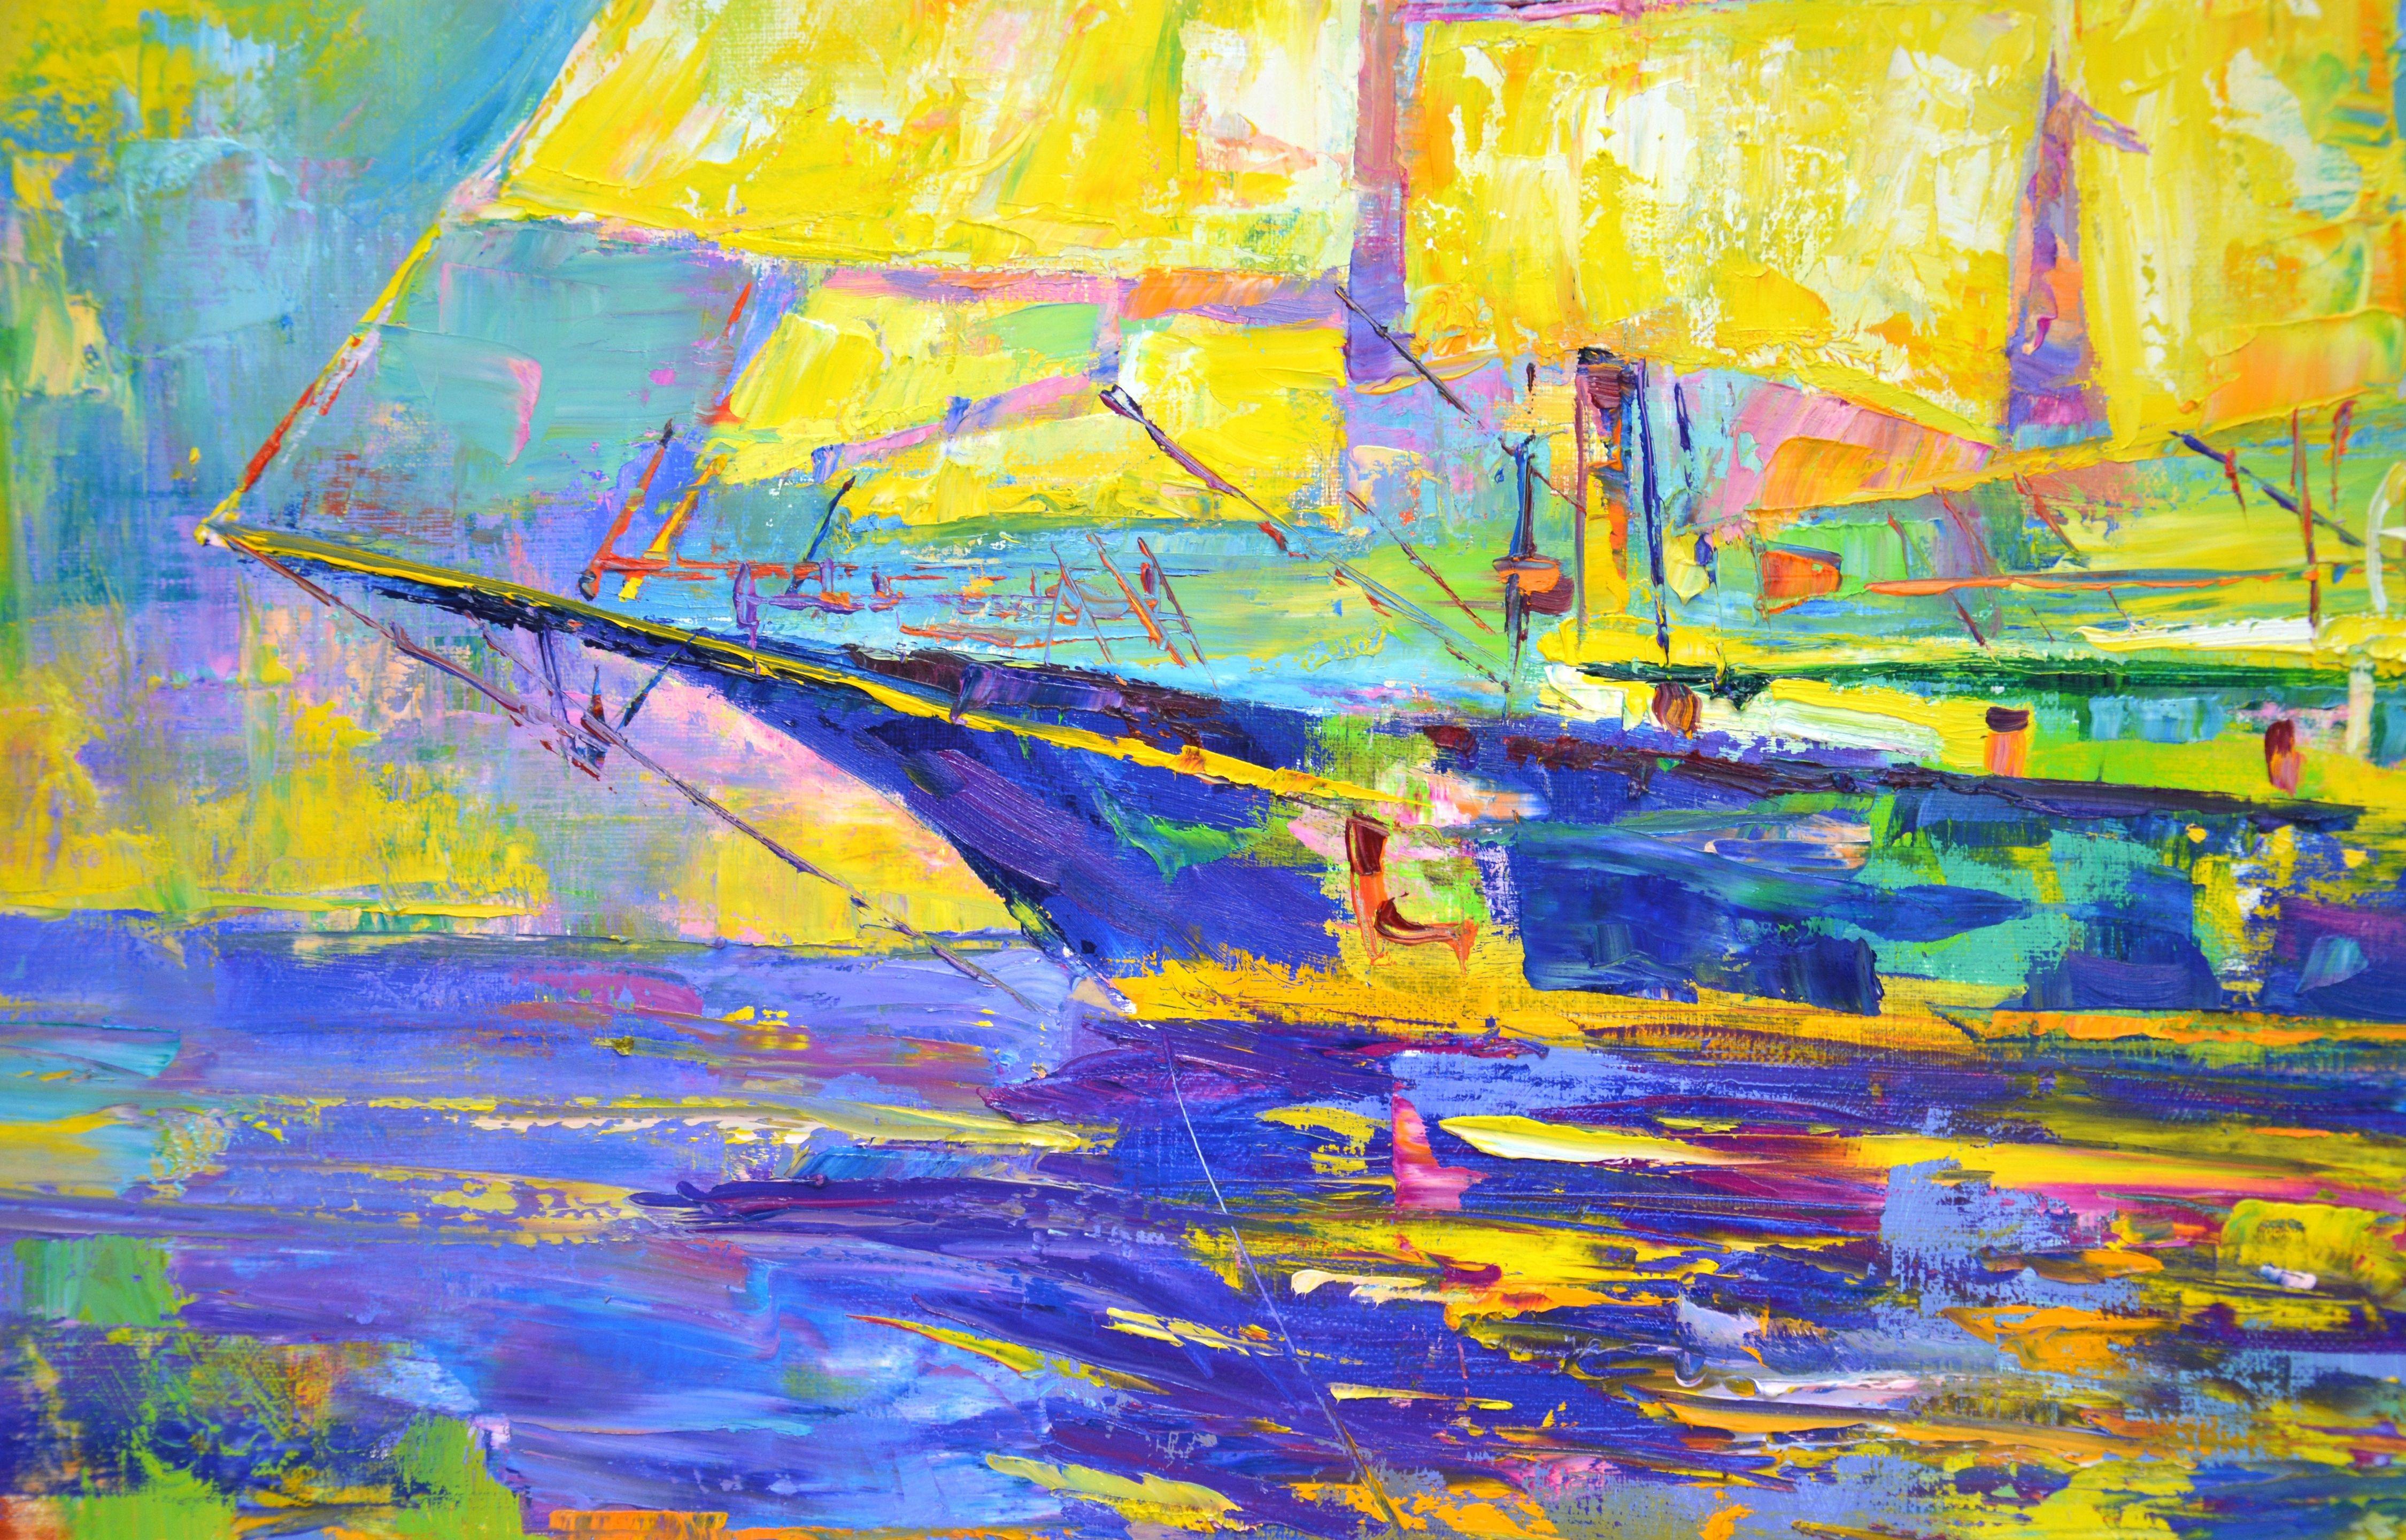 Ship, Painting, Oil on Canvas 2